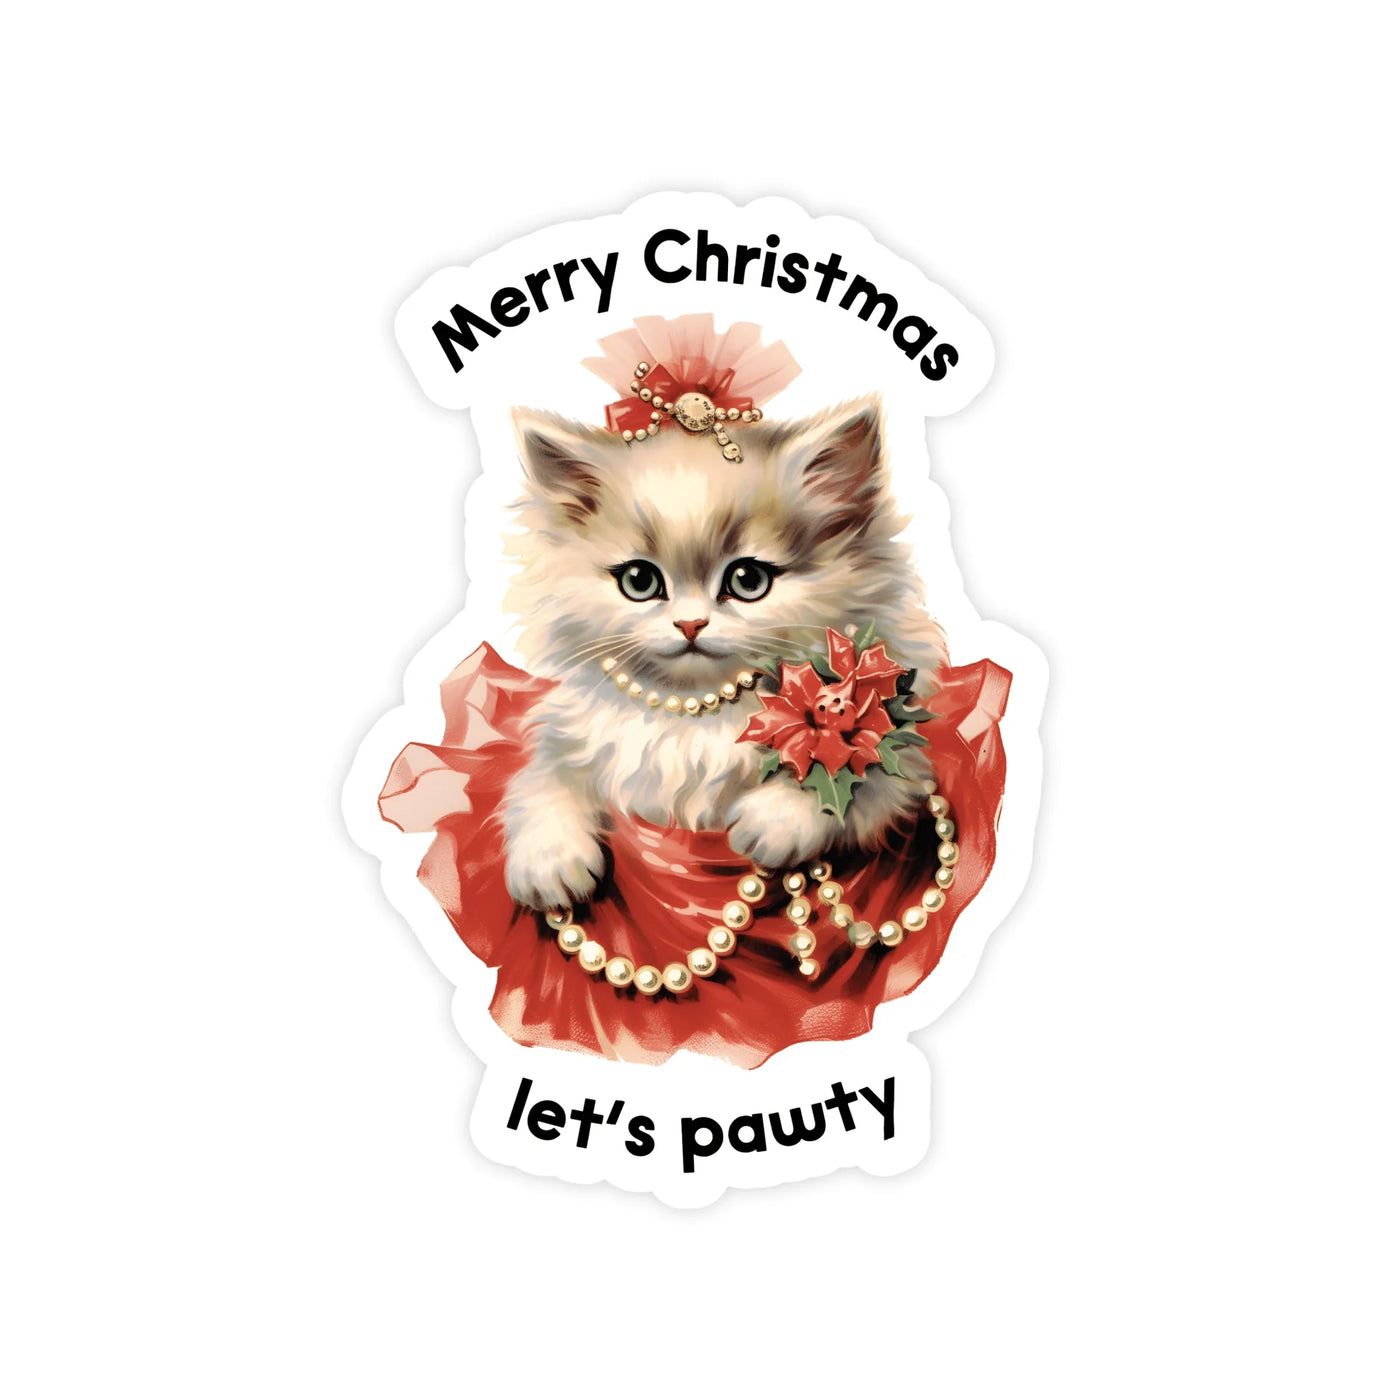 Merry Christmas, Let's Pawty Sticker